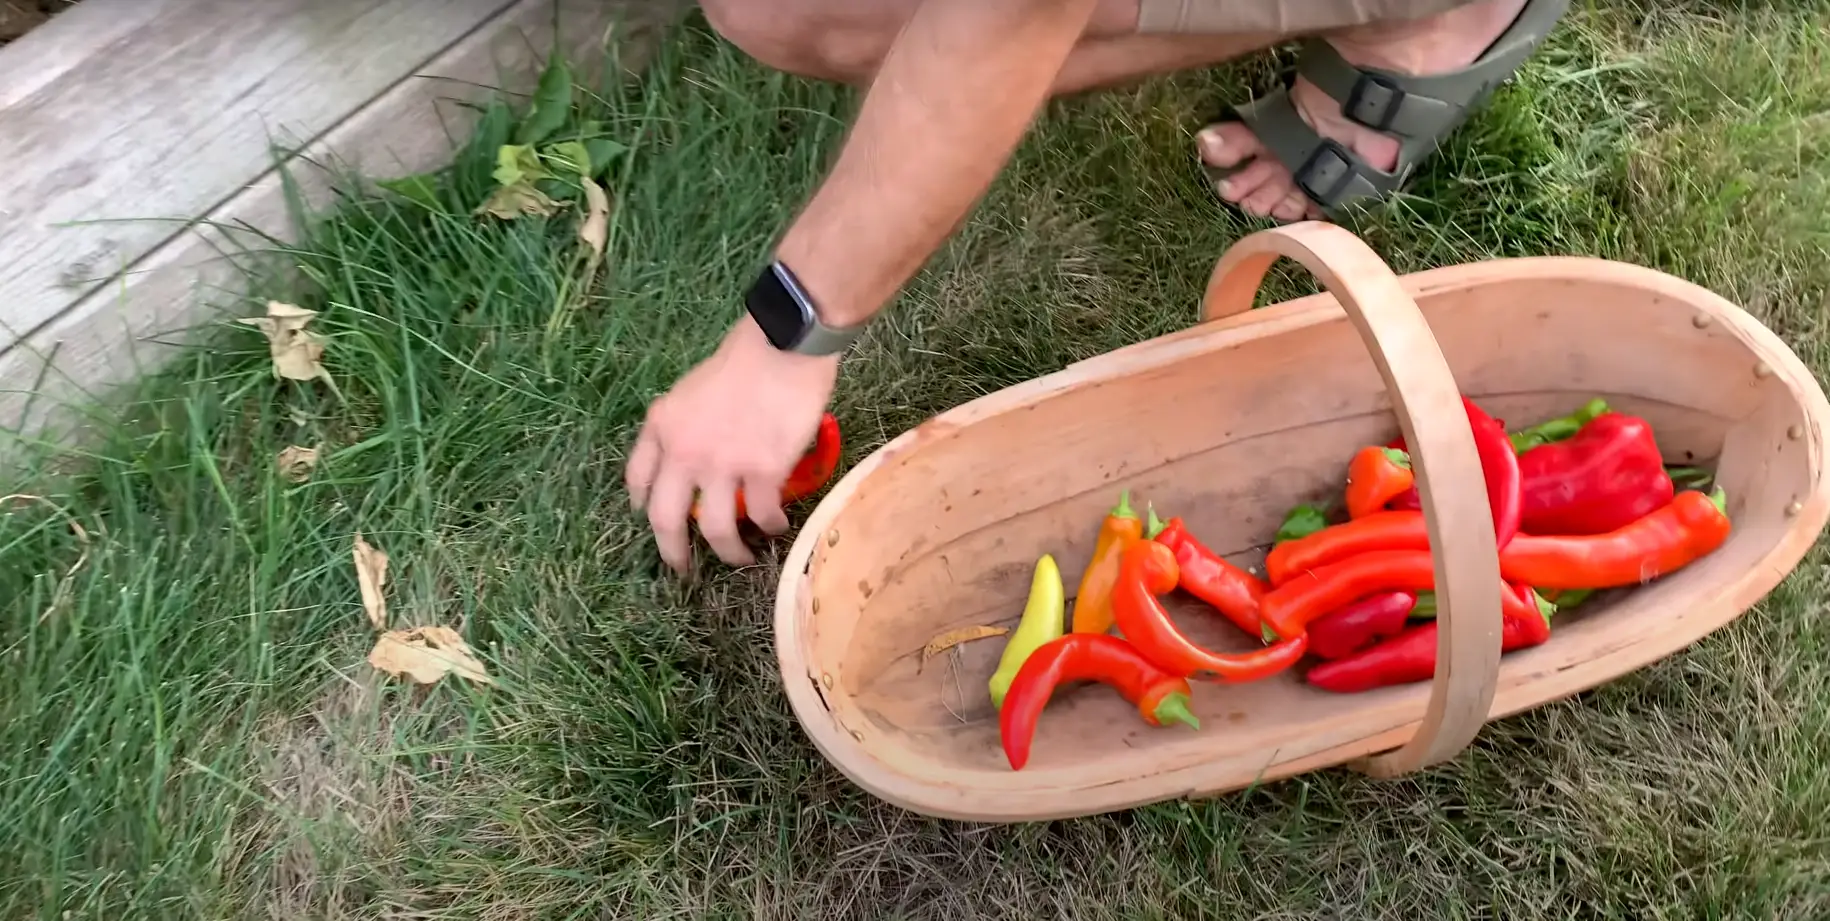 How Long Does It Take For Peppers To Turn Red?